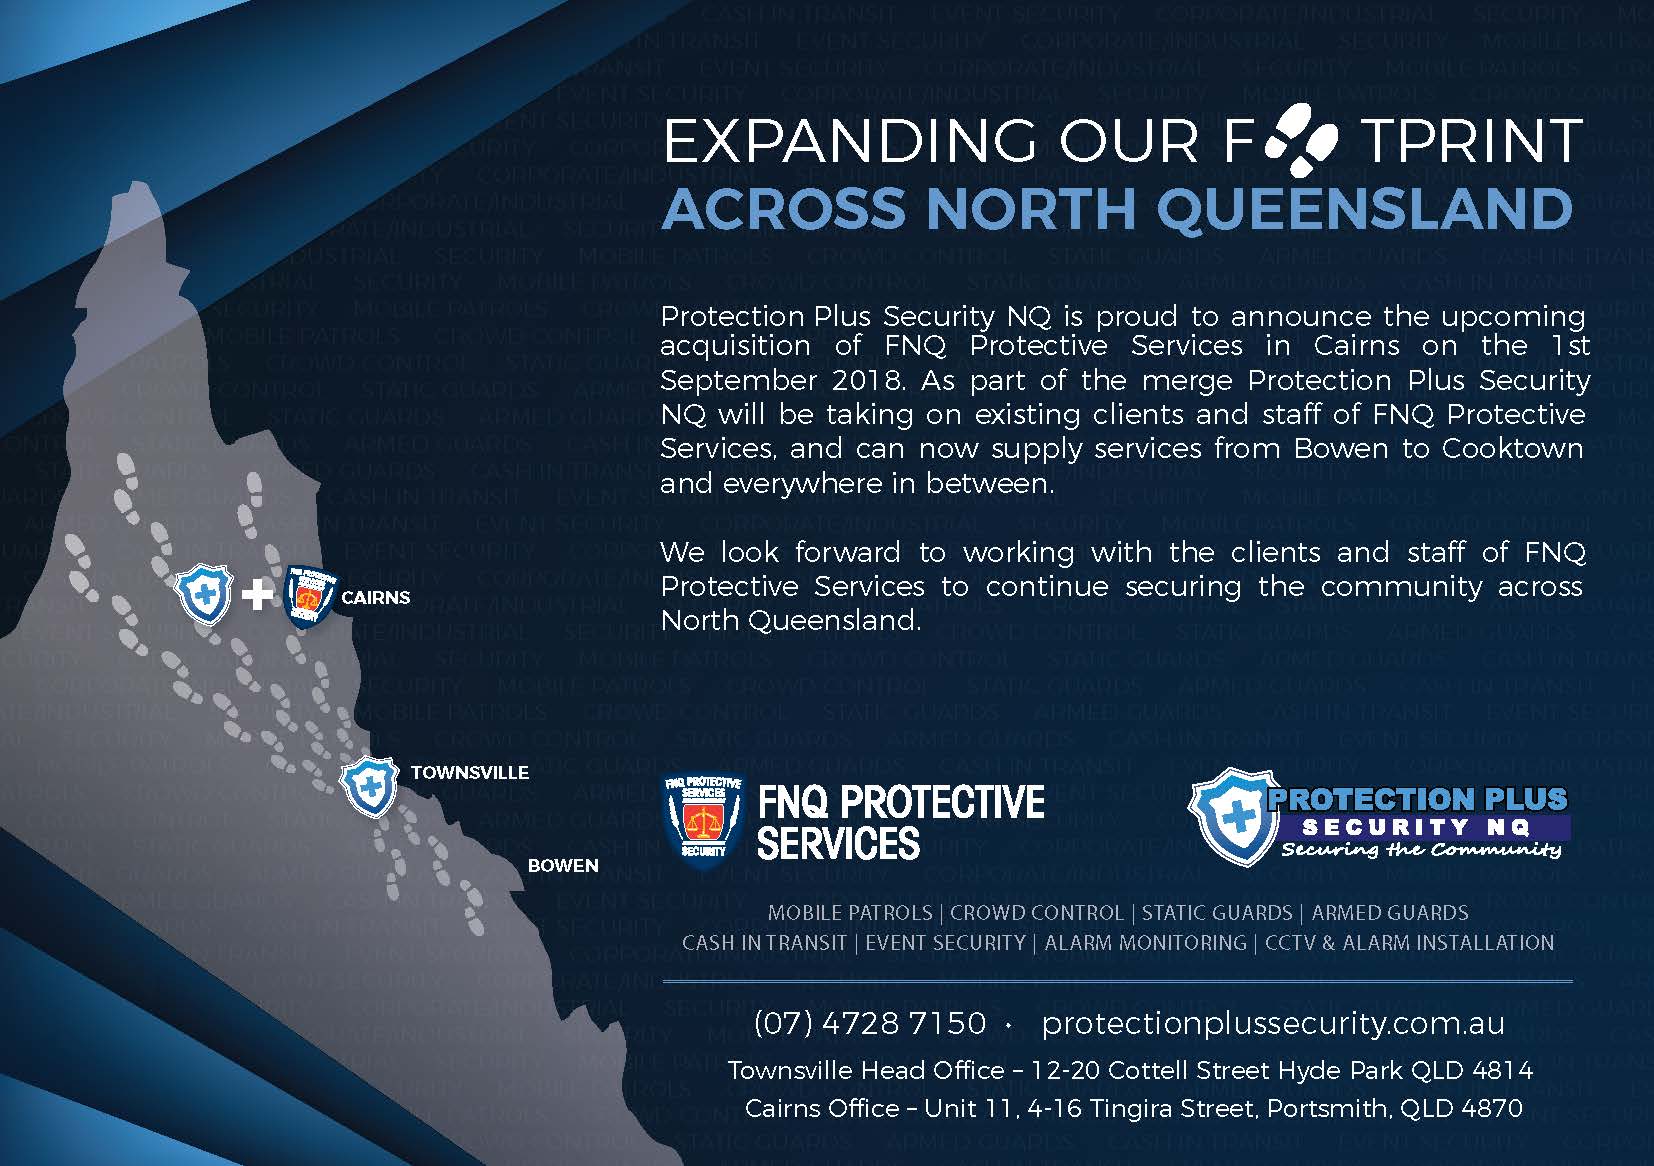 Armed Security Officers, Security Officers, Mobile Patrol Officers & Event Security – Cairns Region